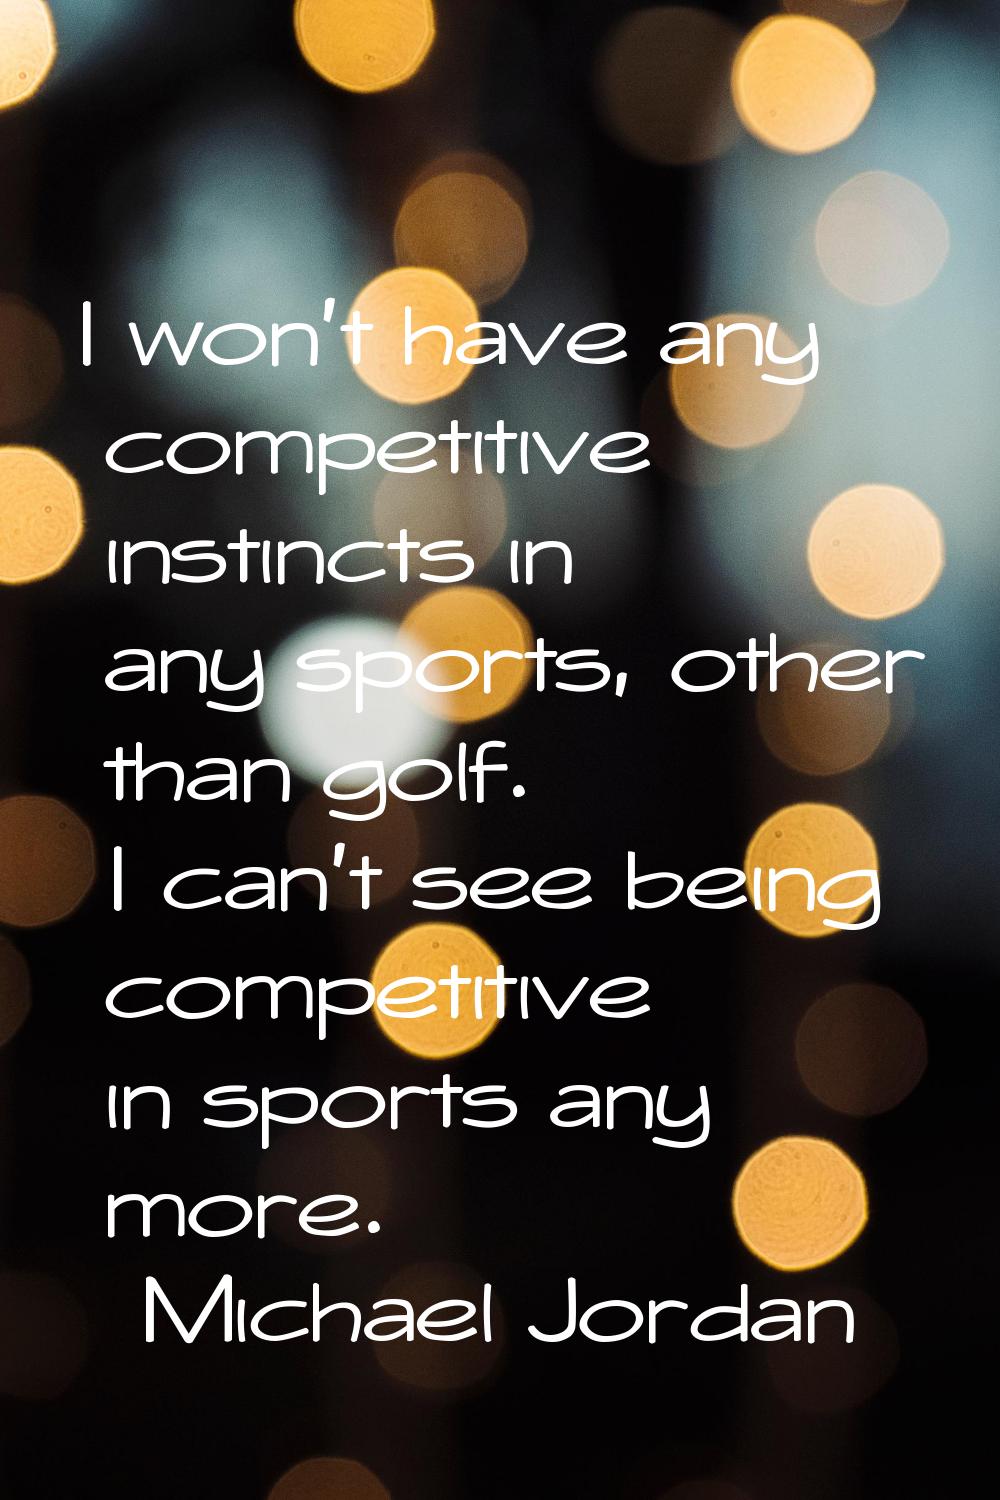 I won't have any competitive instincts in any sports, other than golf. I can't see being competitiv